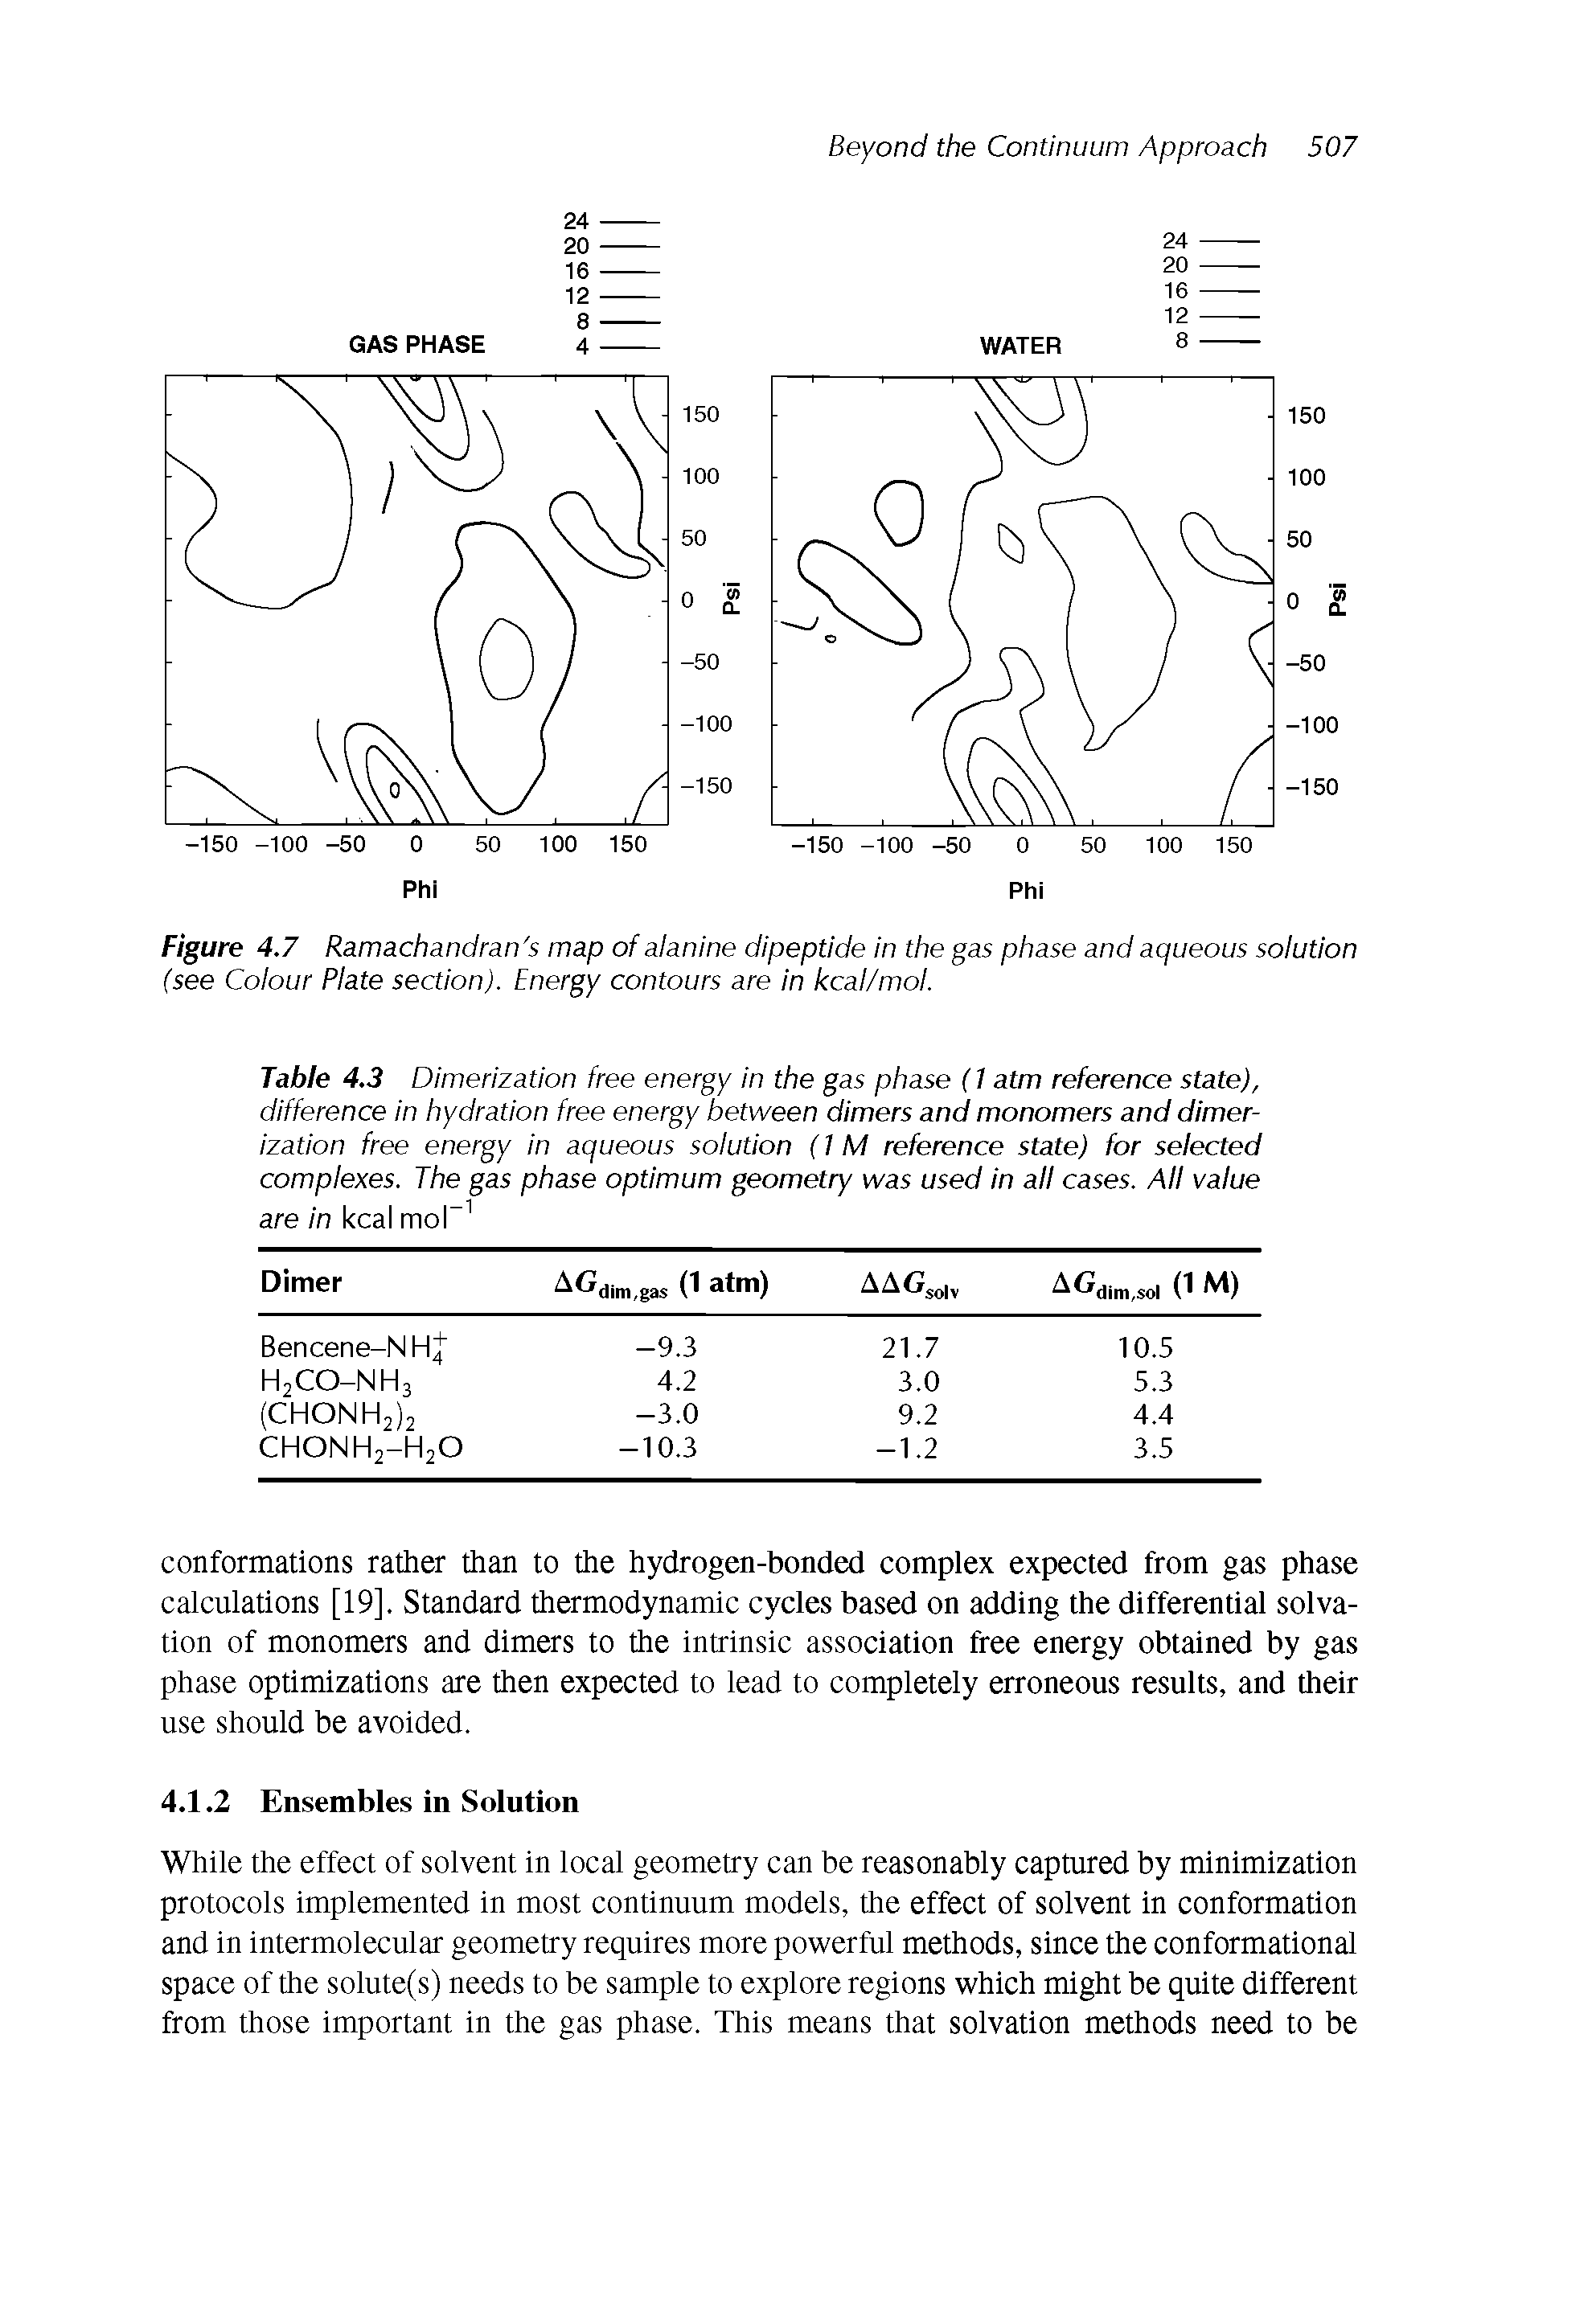 Table 4.3 Dimerization free energy in the gas phase (1 atm reference state), difference in hydration free energy between dimers and monomers and dimerization free energy in aqueous solution (1 M reference state) for selected complexes. The gas phase optimum geometry was used in all cases. All value are in kcal mol-1...